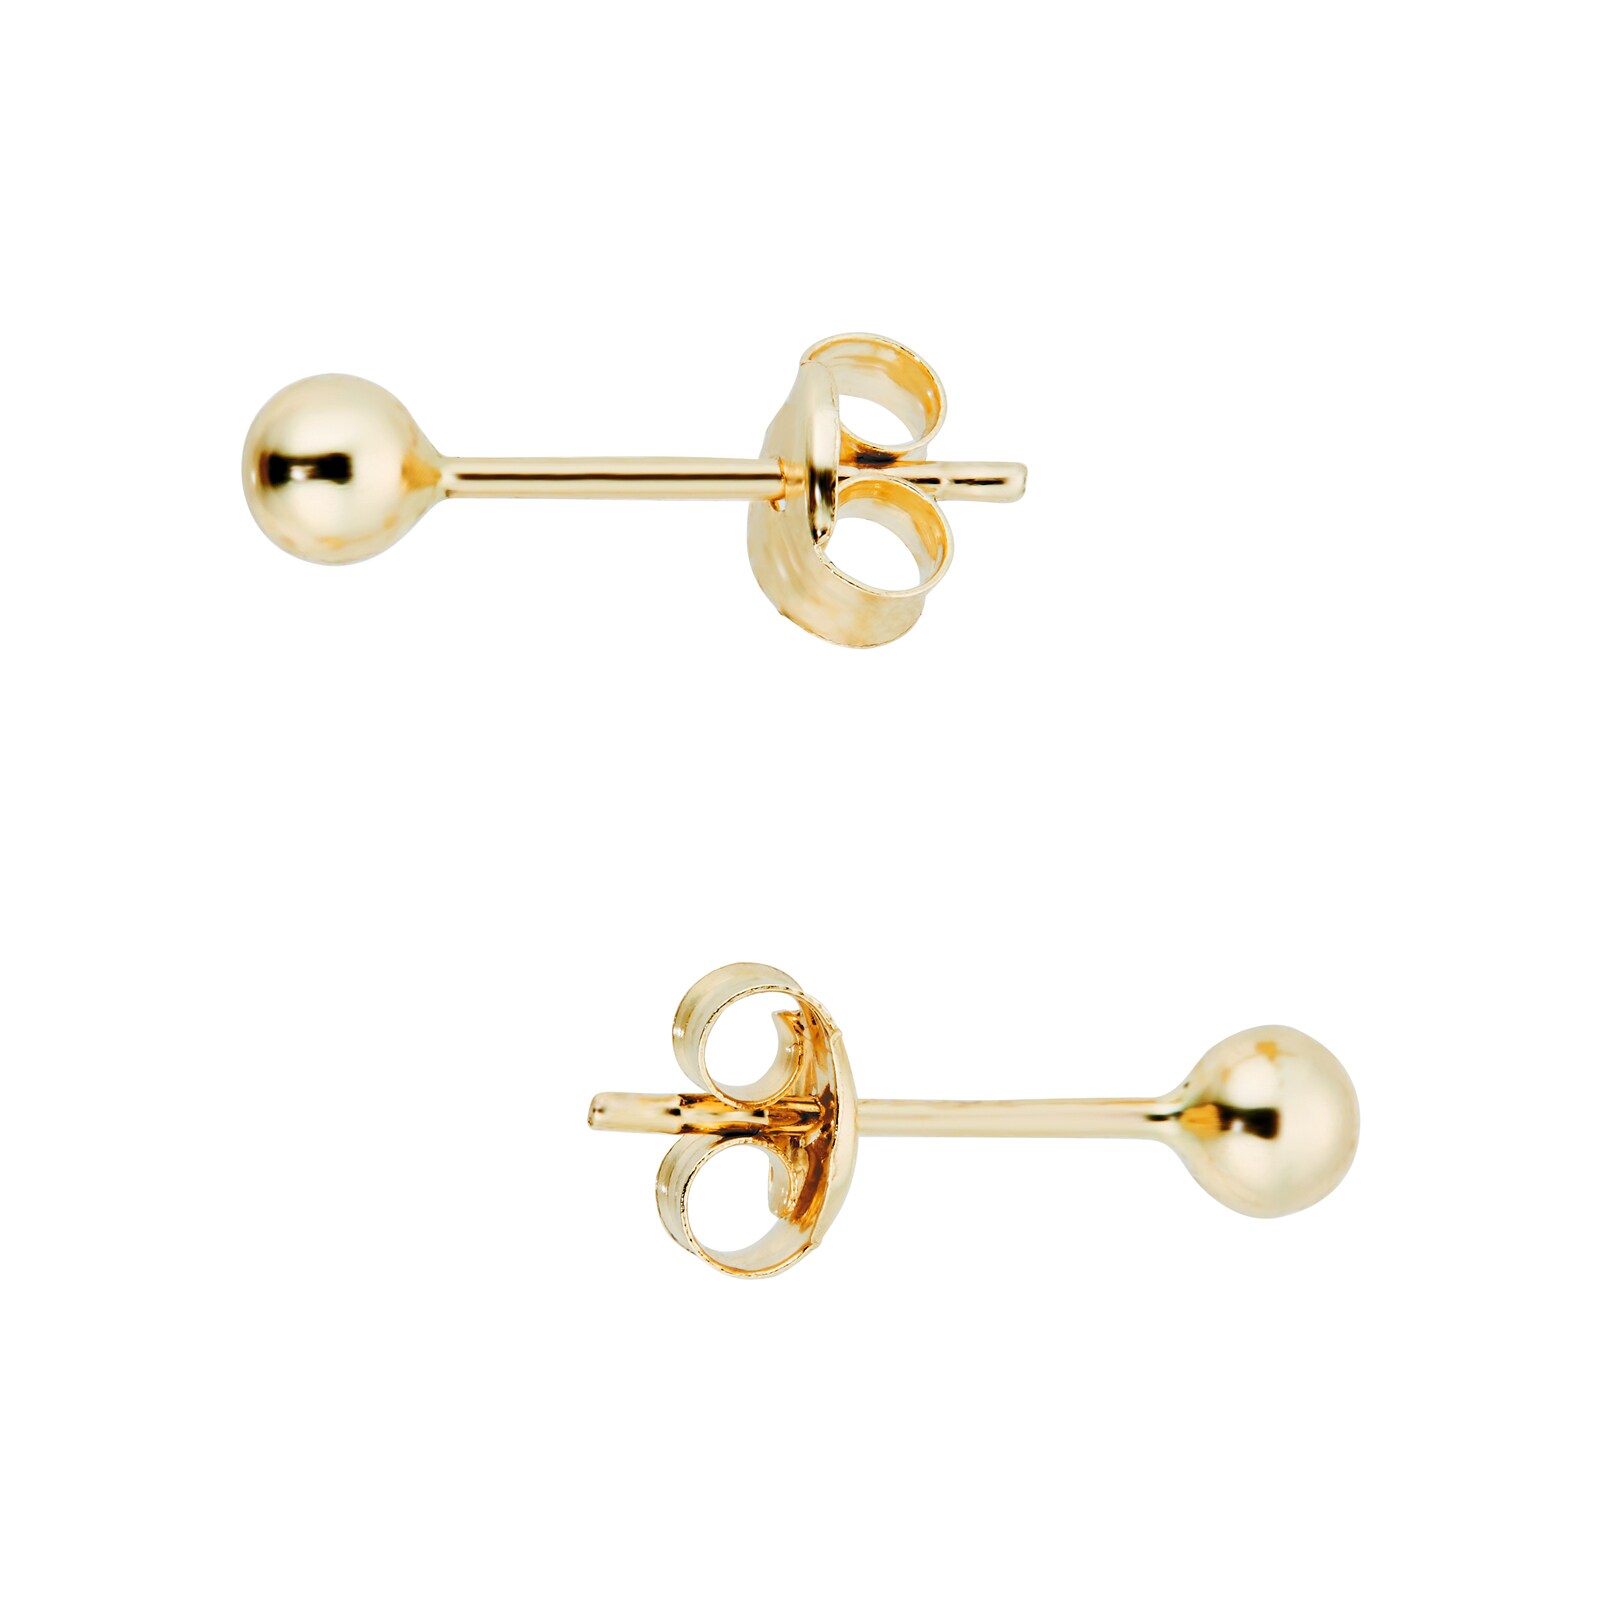 Buy 14K Gold 3mm 4mm Ball Stud Earrings Solid Real Gold Post 14KG15 Online  in India - Etsy